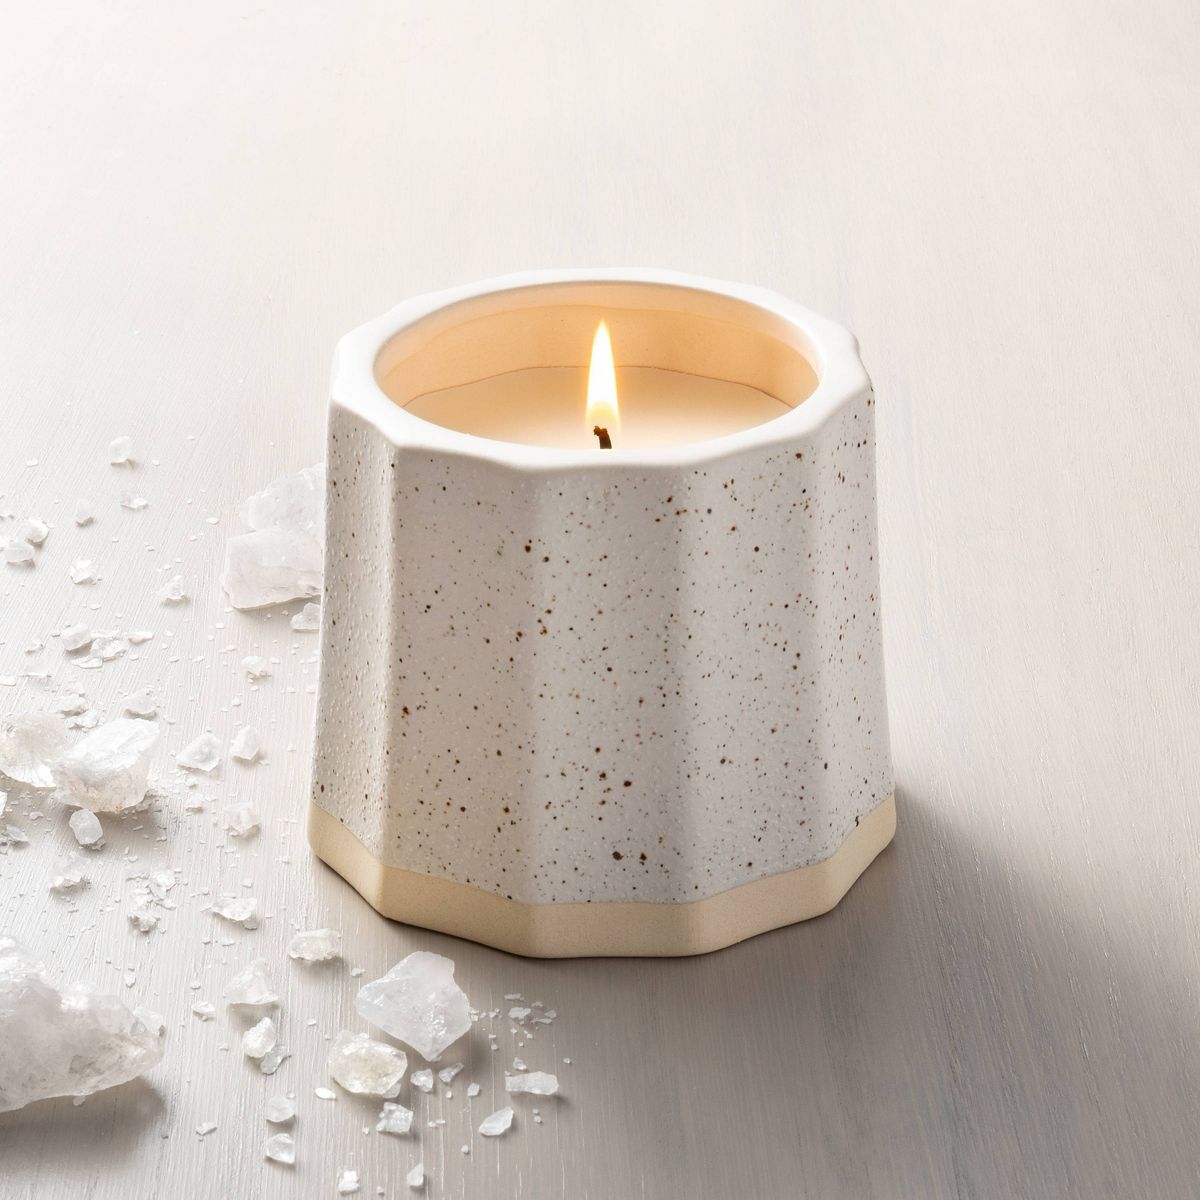 Wide Fluted Speckled Ceramic Salt Jar Candle Tonal Cream 11oz - Hearth & Hand™ with Magnolia | Target